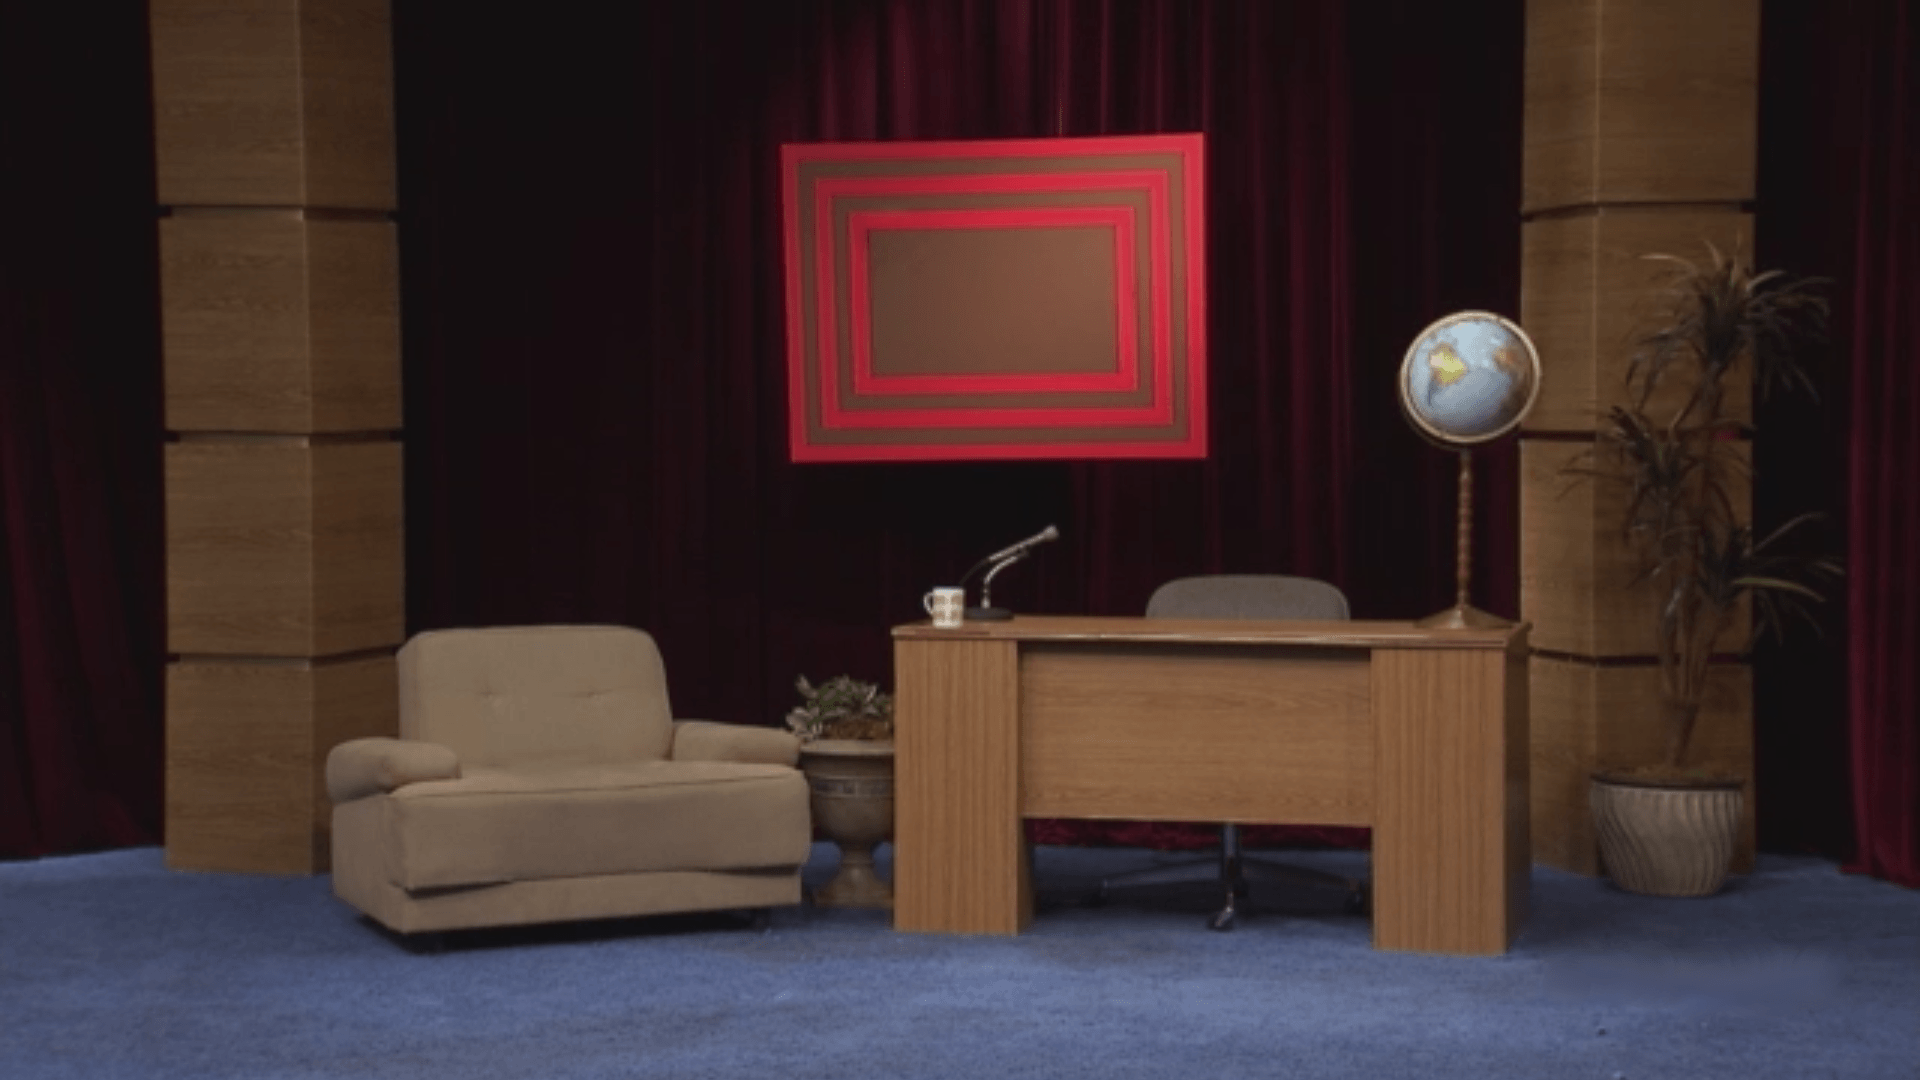 The Eric Andre Show Set Wallpaper (1920 x 1080)